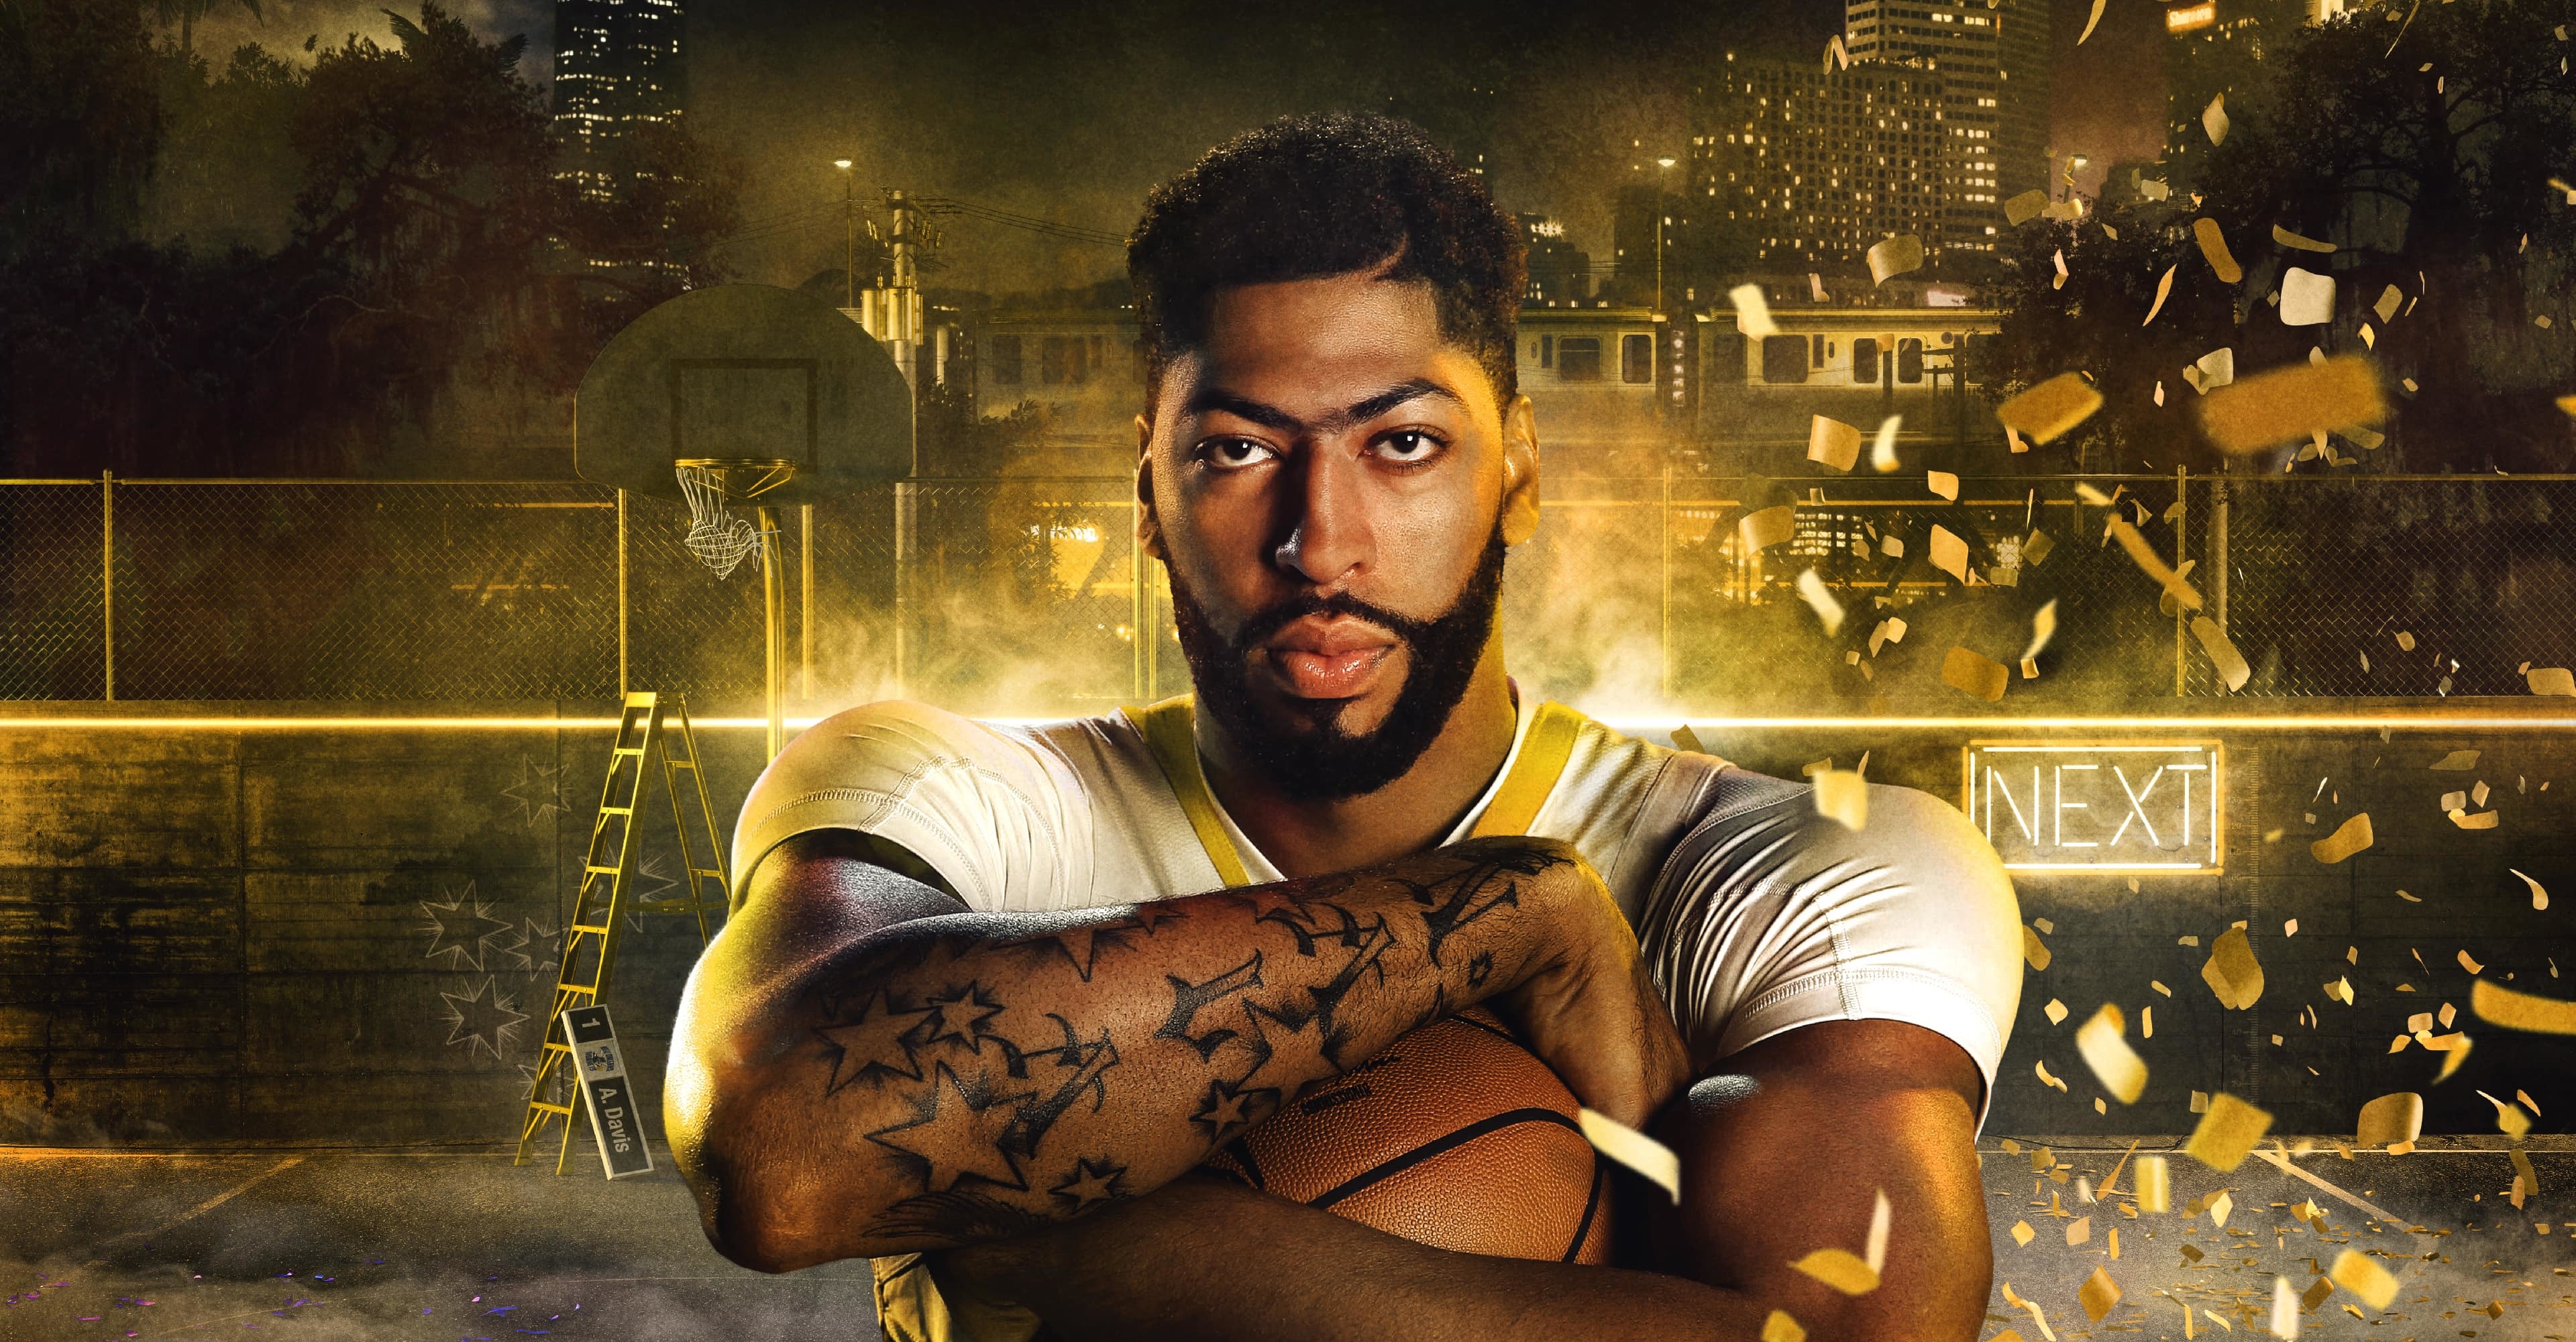 NBA 2K20 Cover Stars And Release Date Revealed